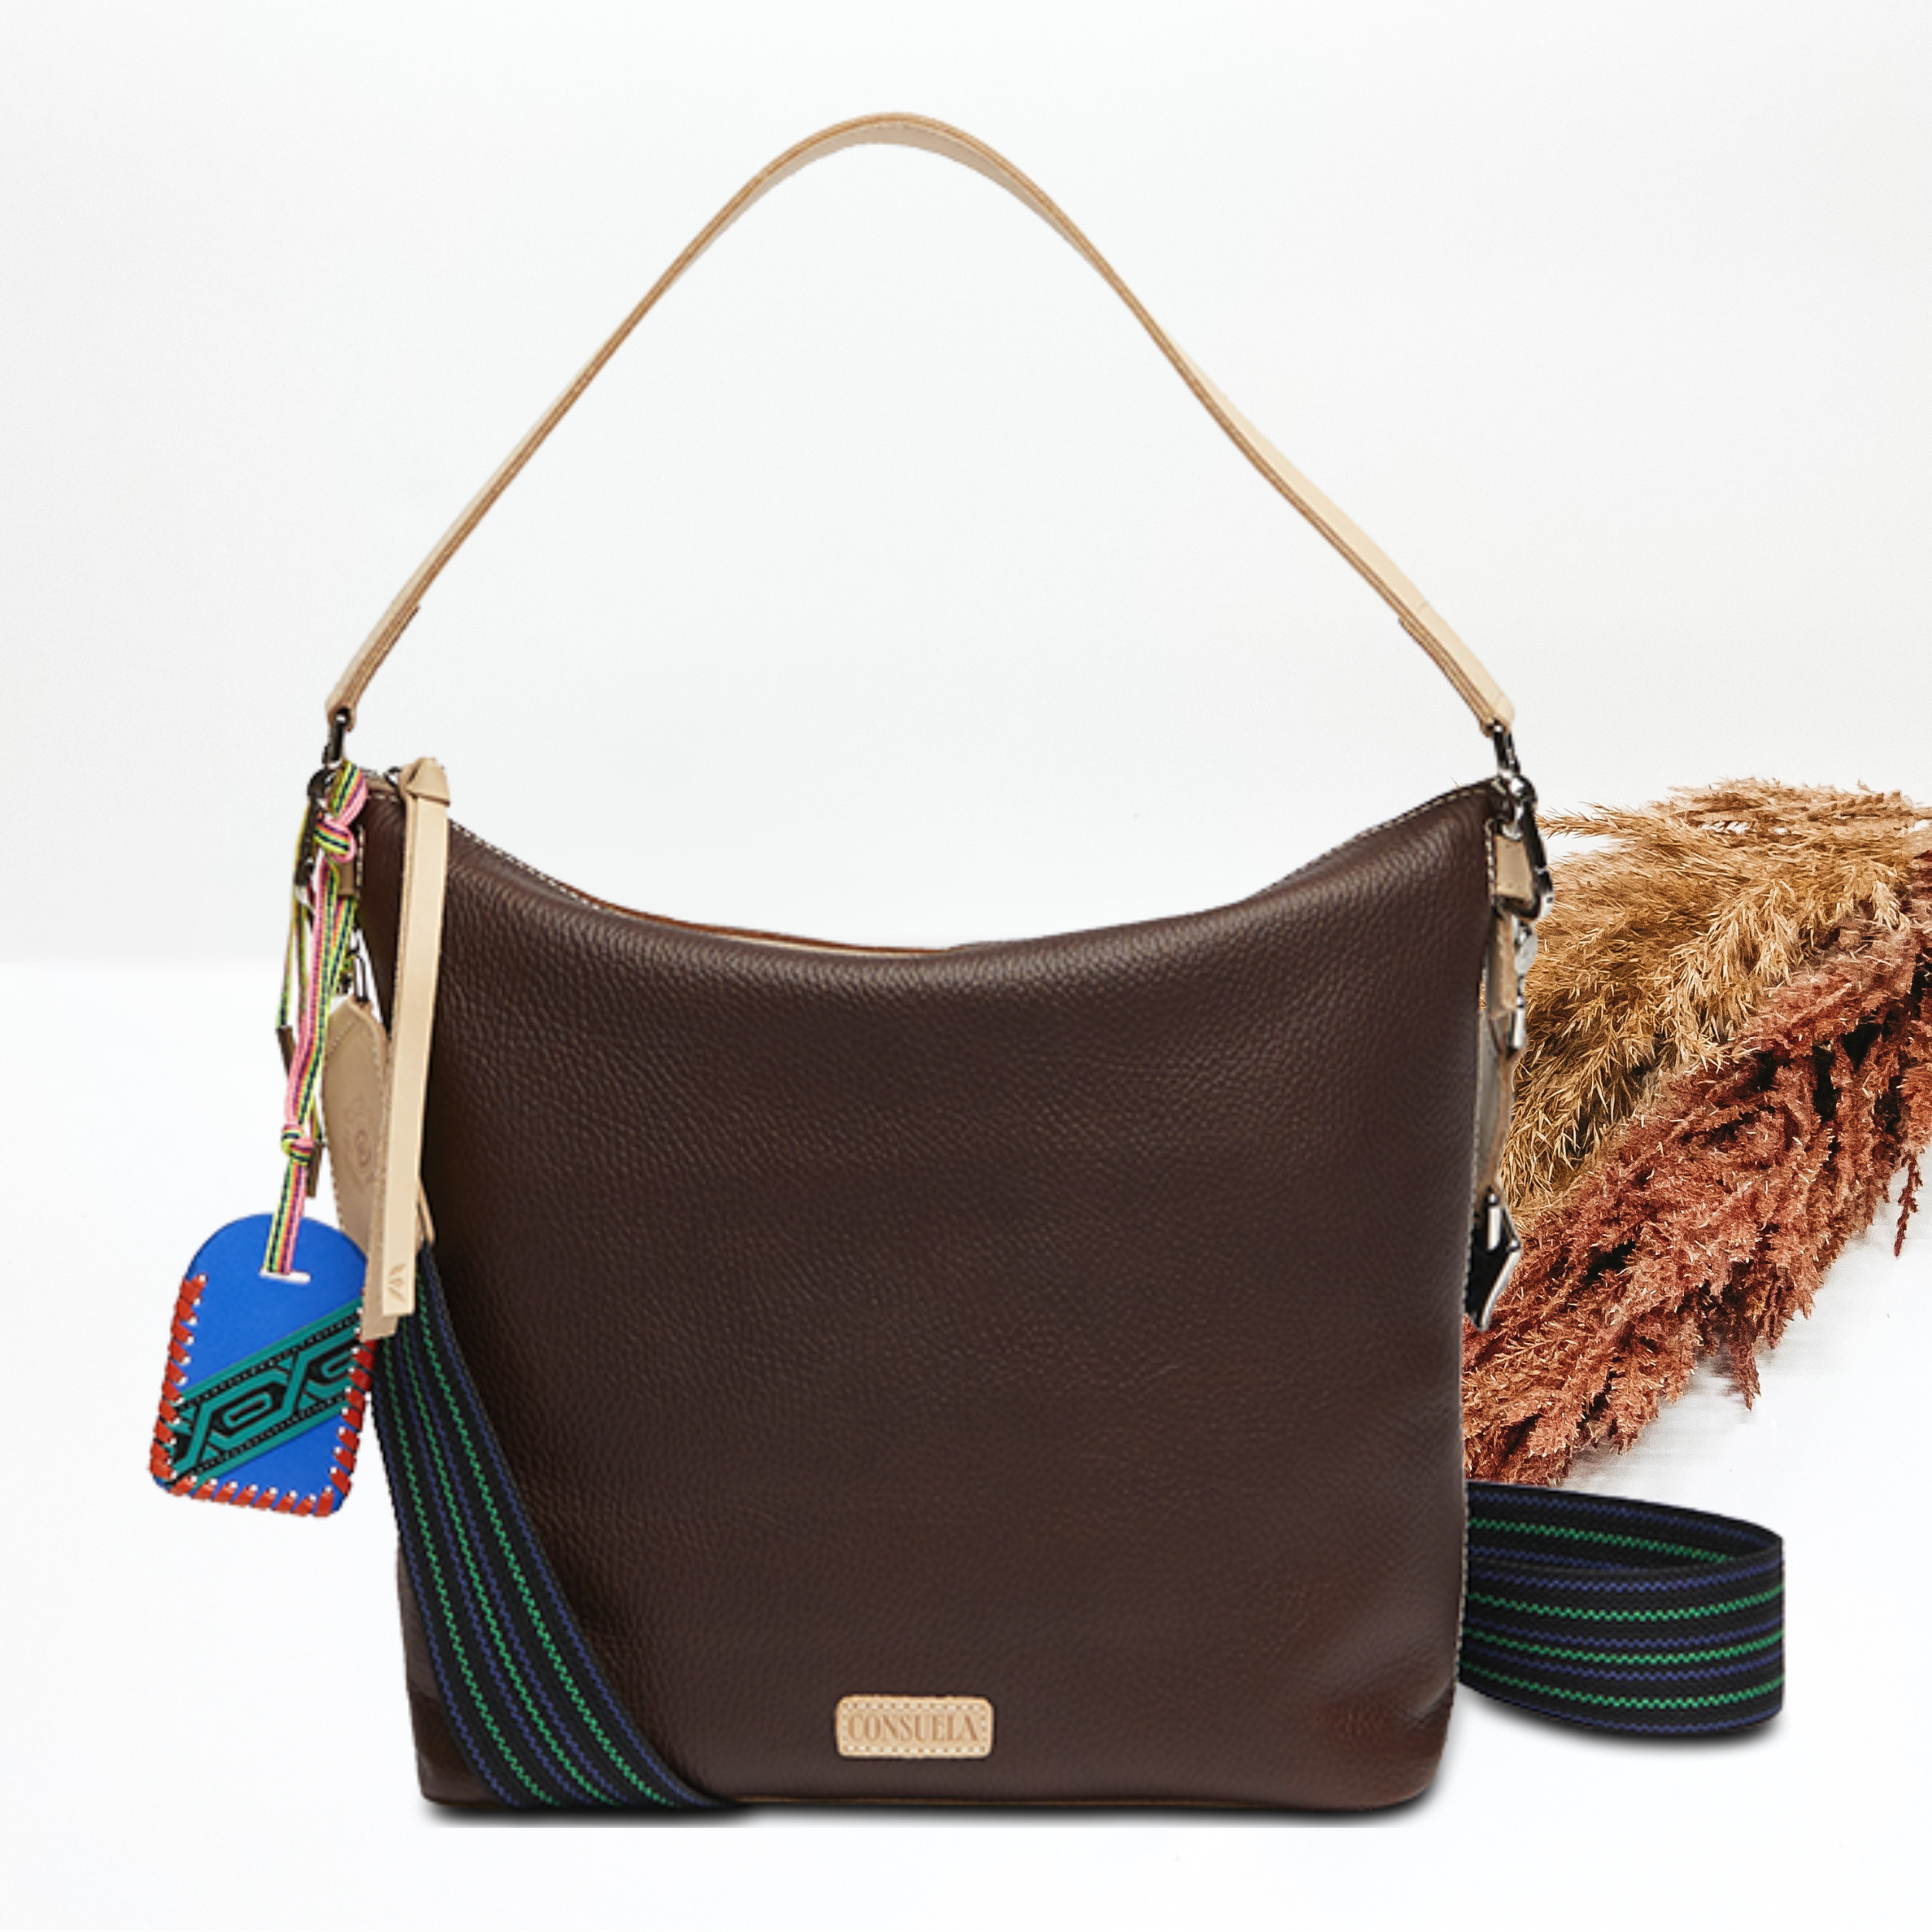 Pictured on a white background is dark brown leather hobo bag with a light tan shoulder strap. This bag also includes a striped crossbody strap., light tan tassel on the zipper and blue charm.